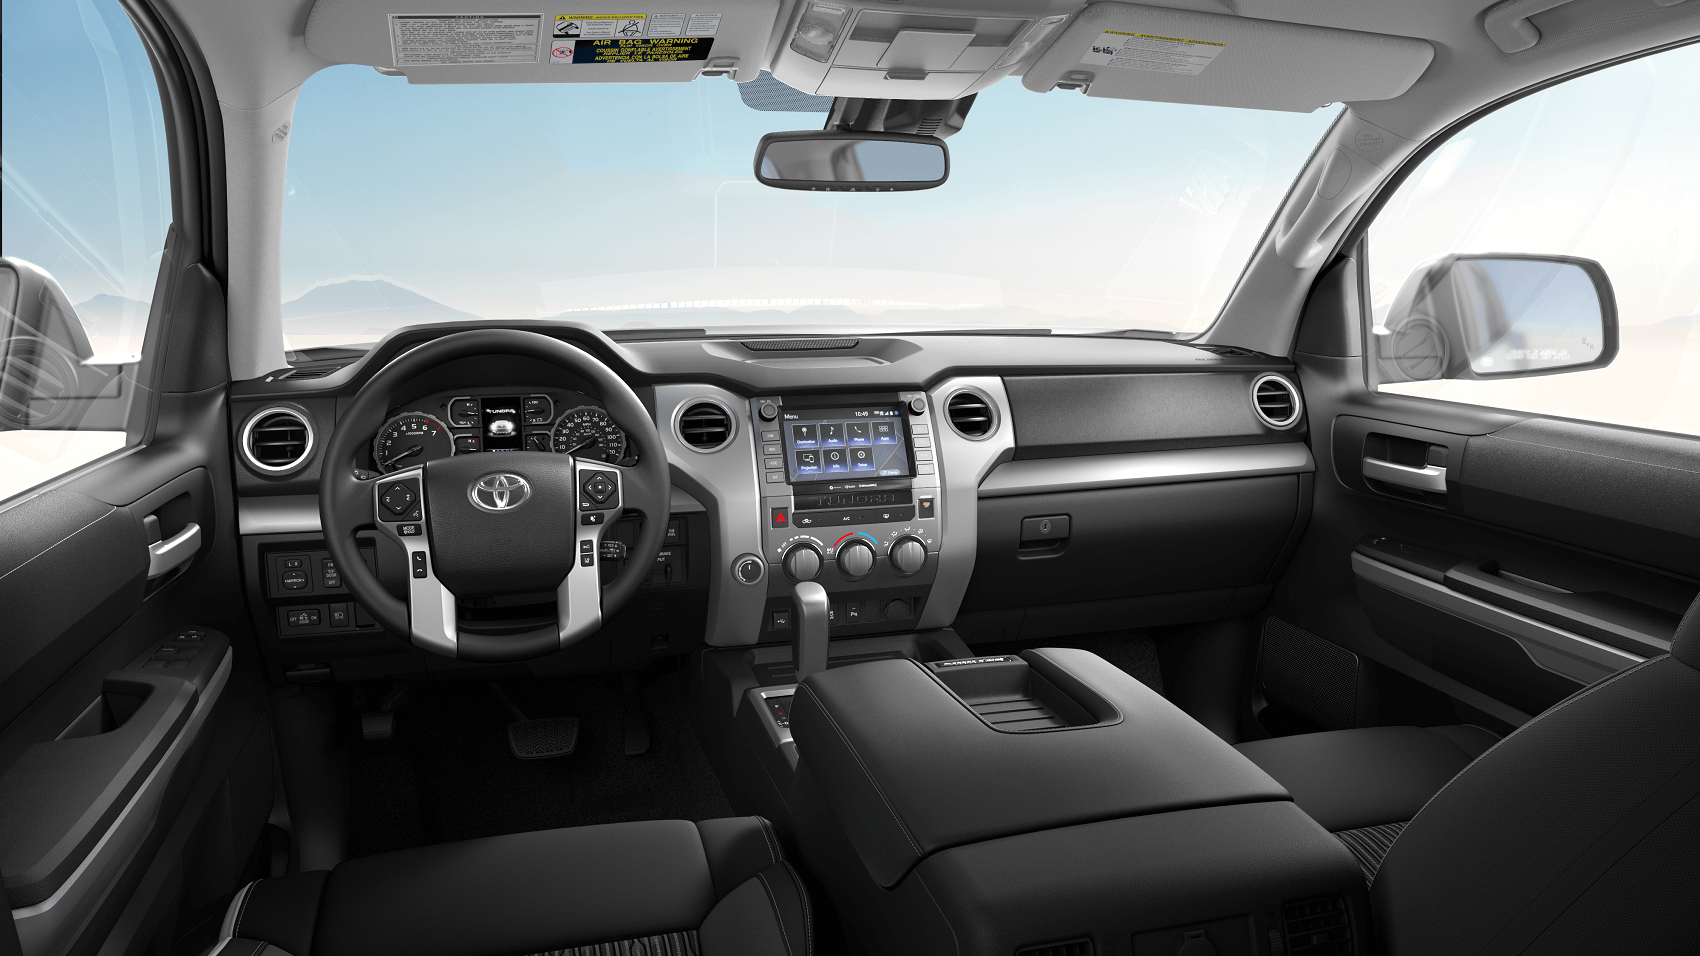 Toyota Tundra Tech Features